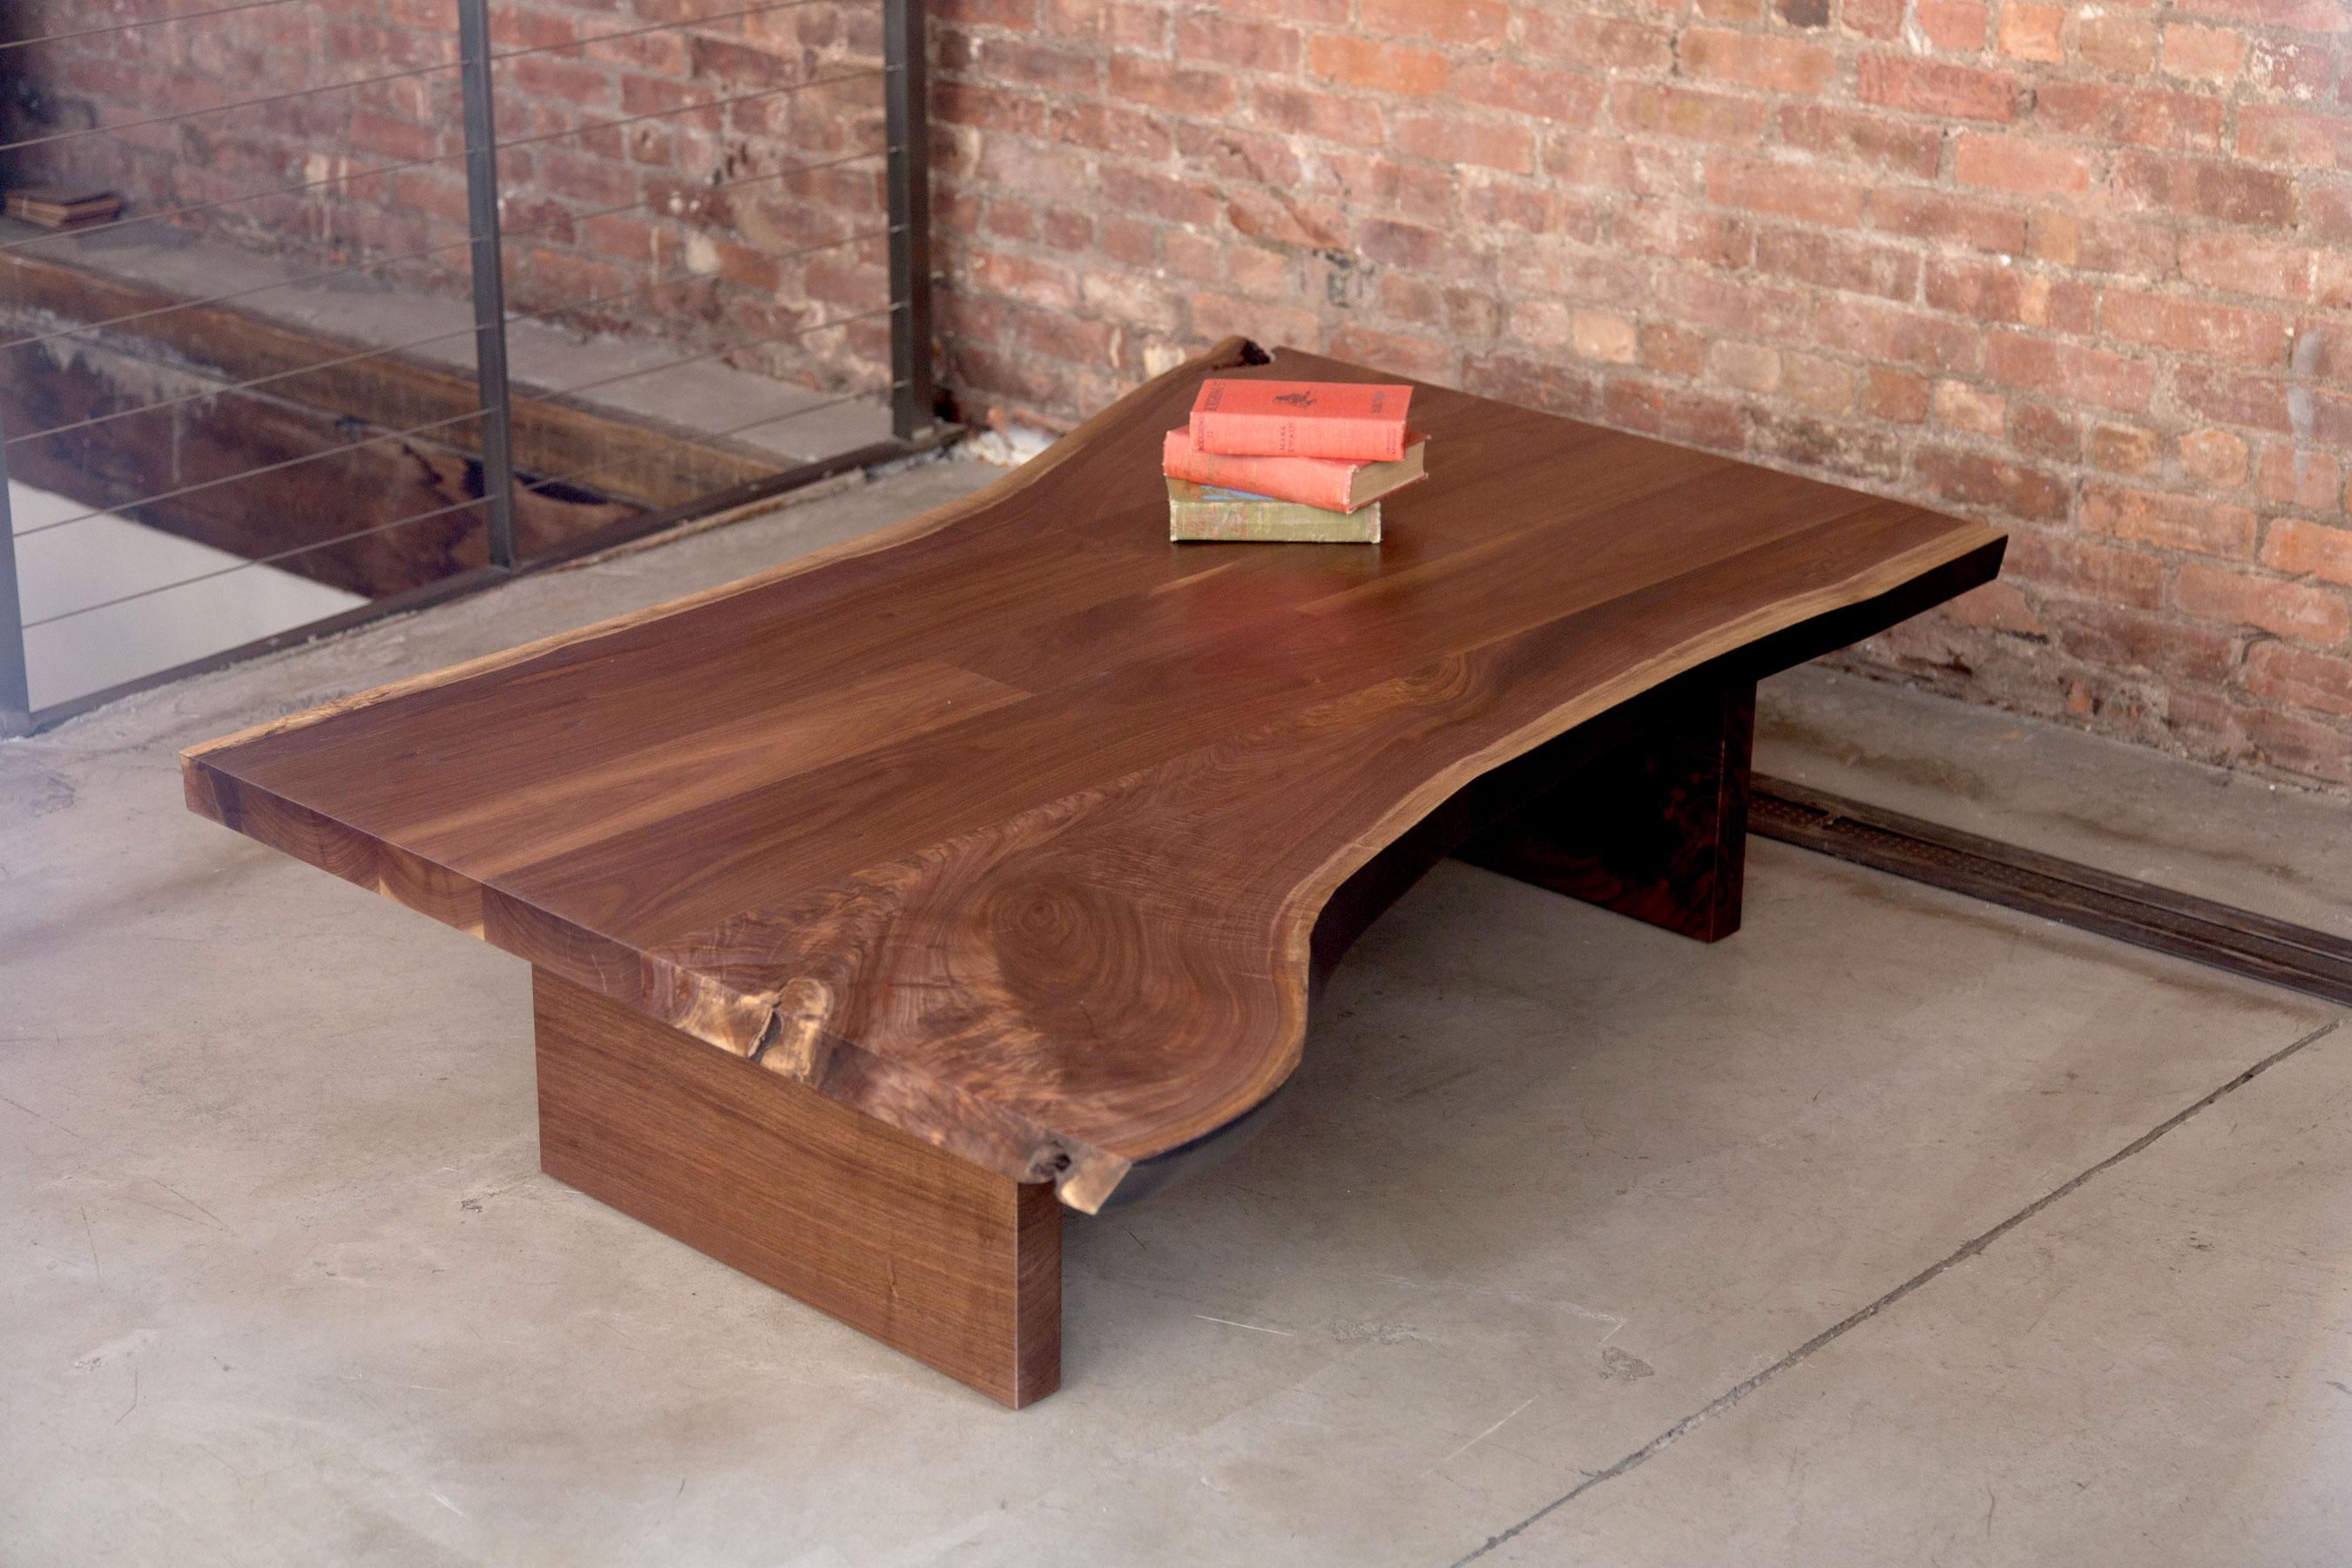 A coffee table made from a walnut live edge slab, using the same techniques and stock as our Signature dining tables. Matching block or open frame wood legs are included. 

Custom-made to order. We can match finish control samples or change the